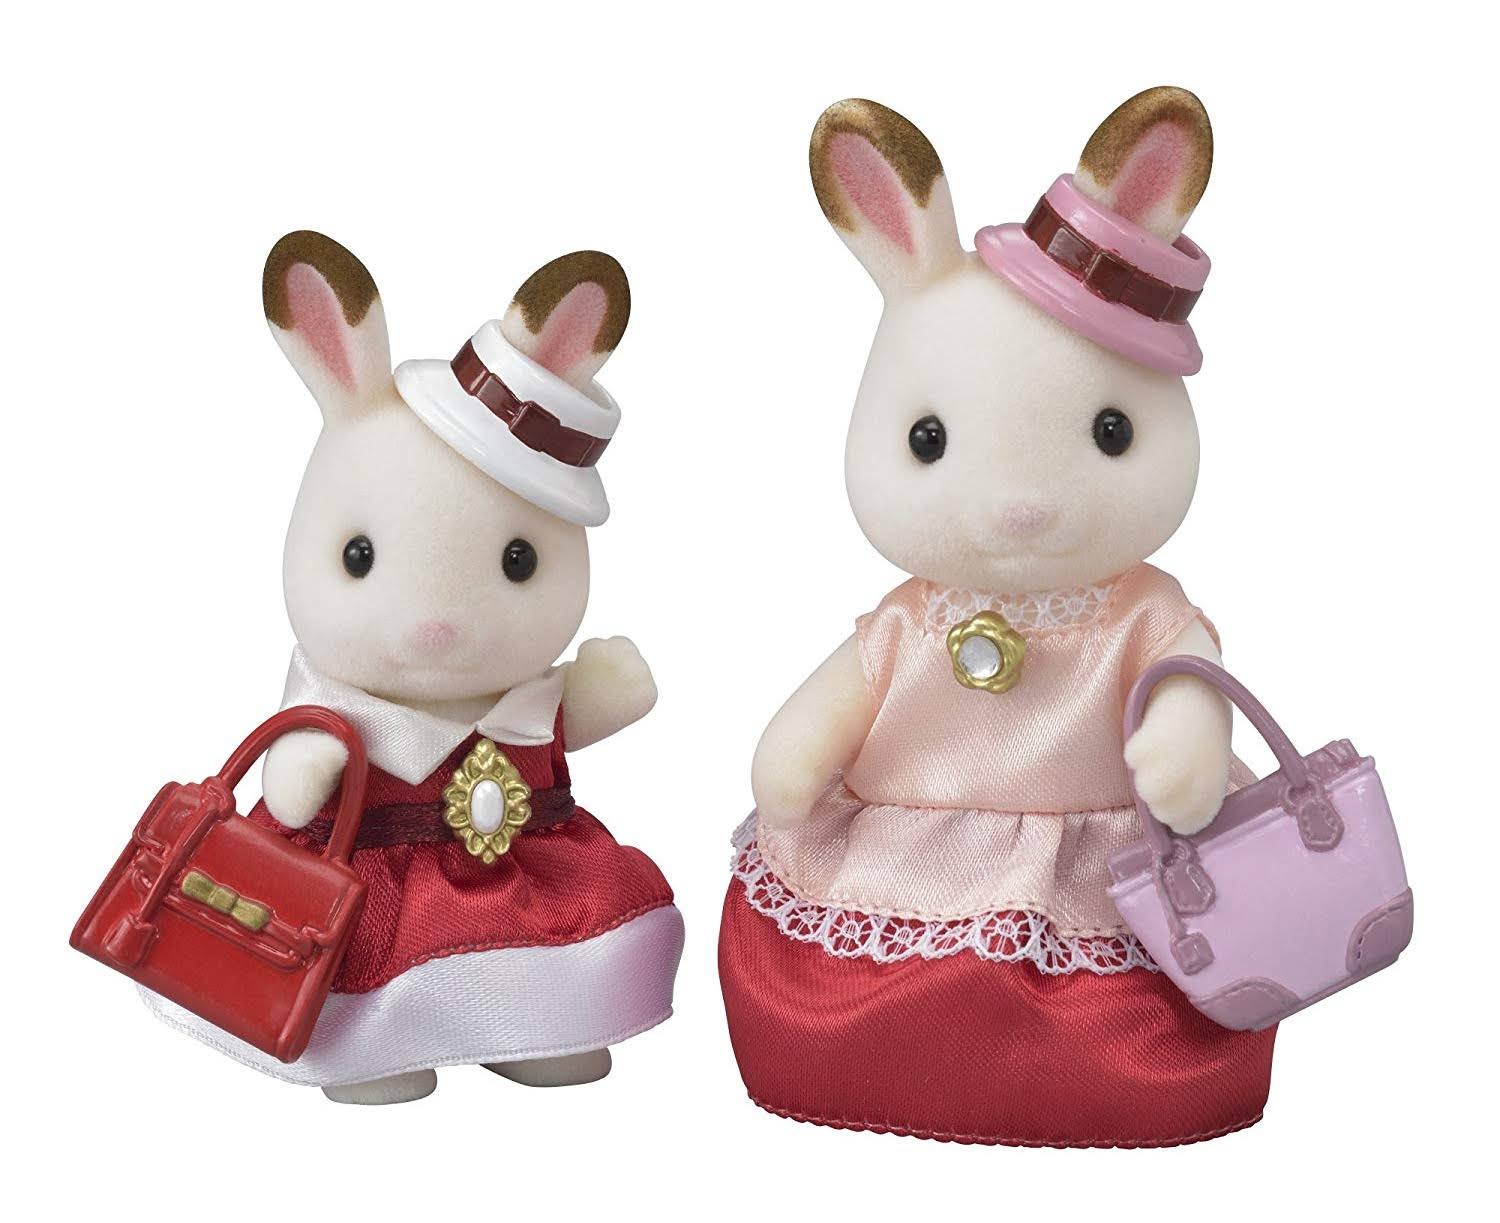 Calico Critters Dress up Duo Playset